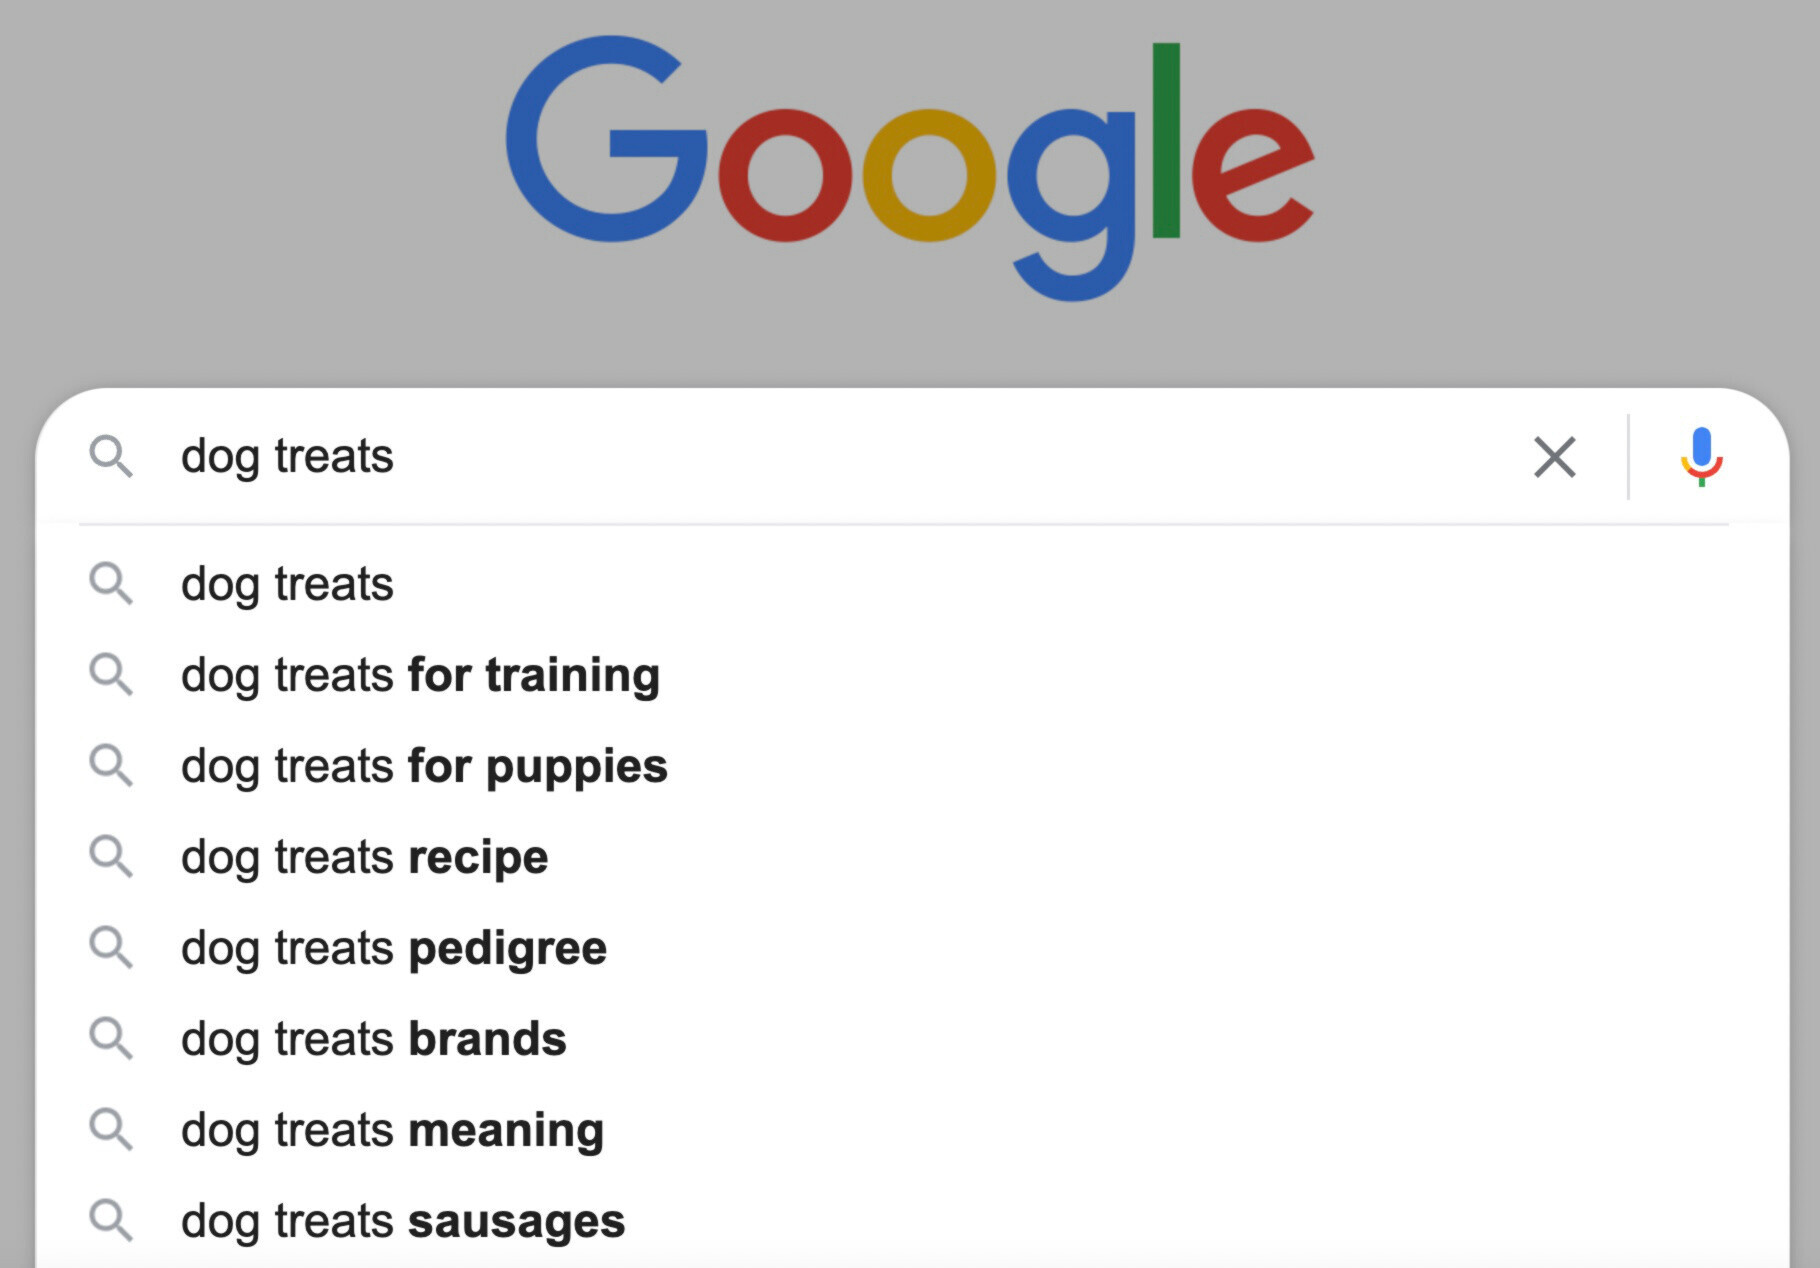 Search suggestions for the keyword "dog treats"